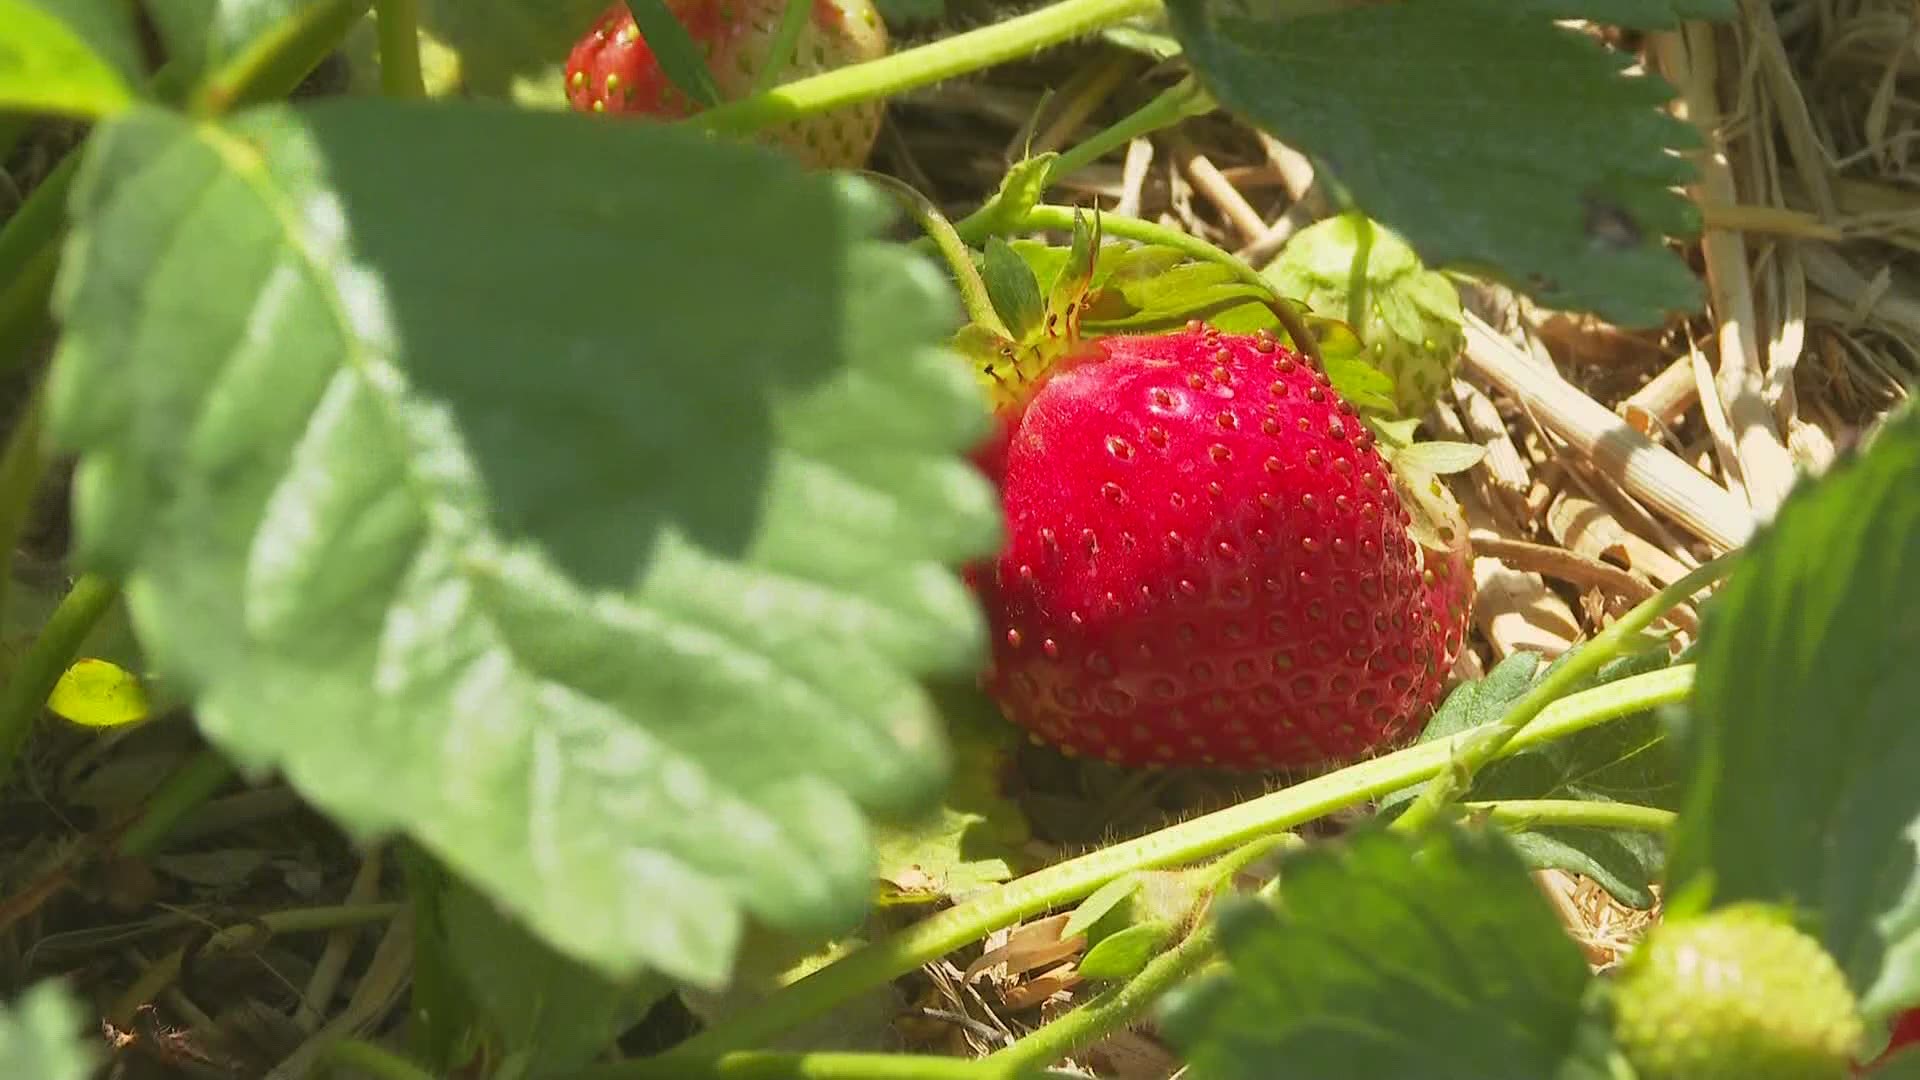 Traditional strawberry picking on local farms will have to make changes to the way they operate to accommodate Covid-19 restrictions.